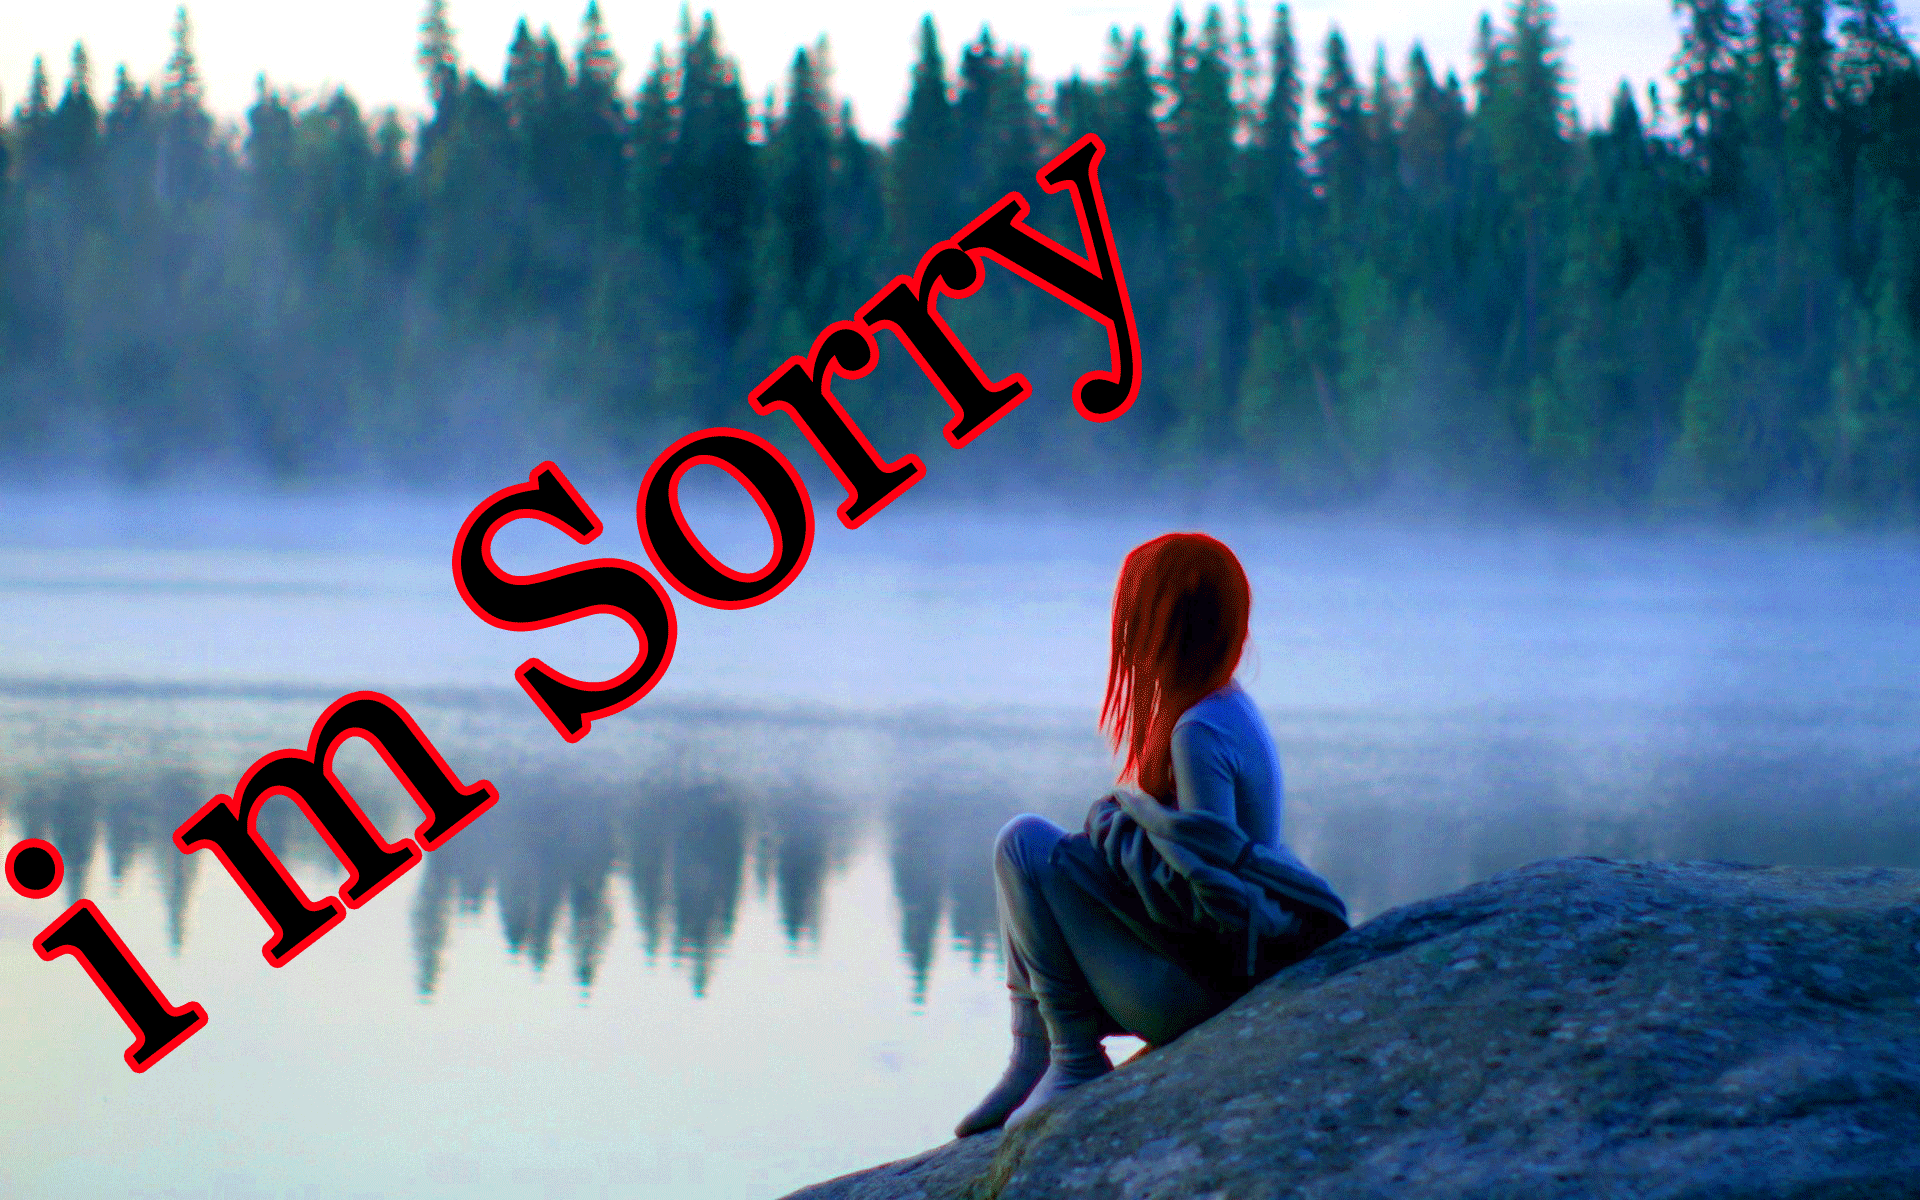 I Am Sorry Images Wallpaper Pictures Photo Download , HD Wallpaper & Backgrounds